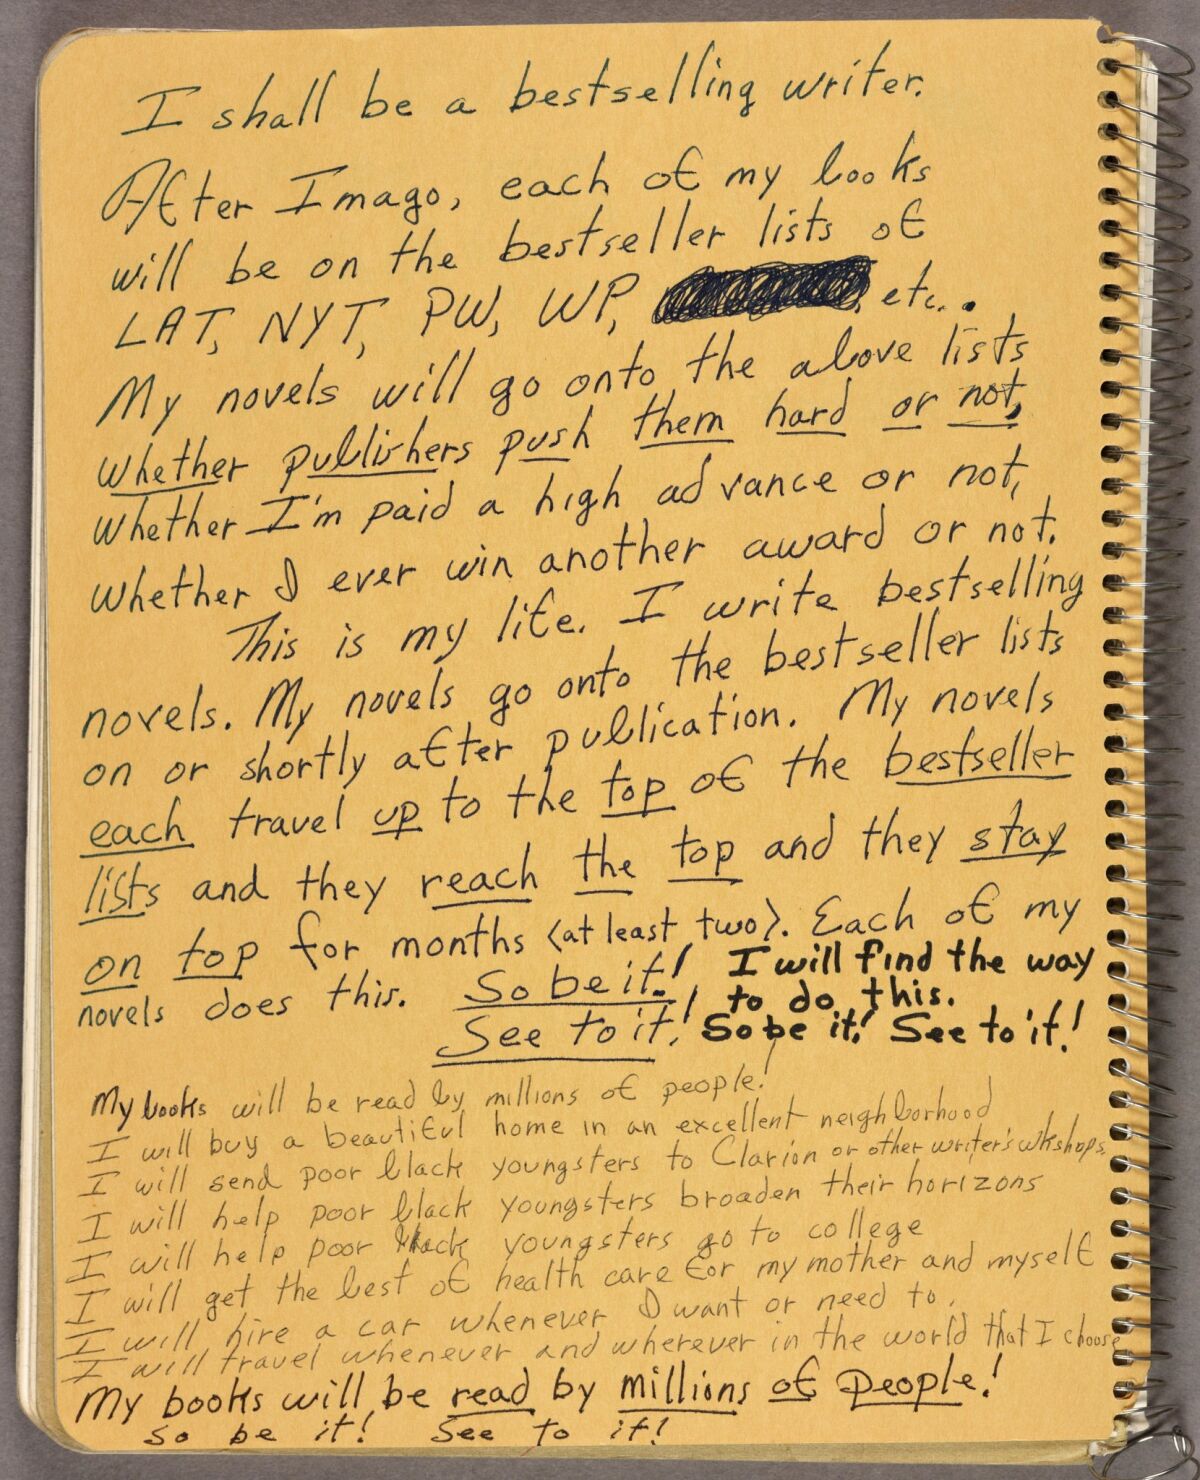 Handwritten notes on the inside cover of one of Octavia E. Butler's commonplace books, 1988.